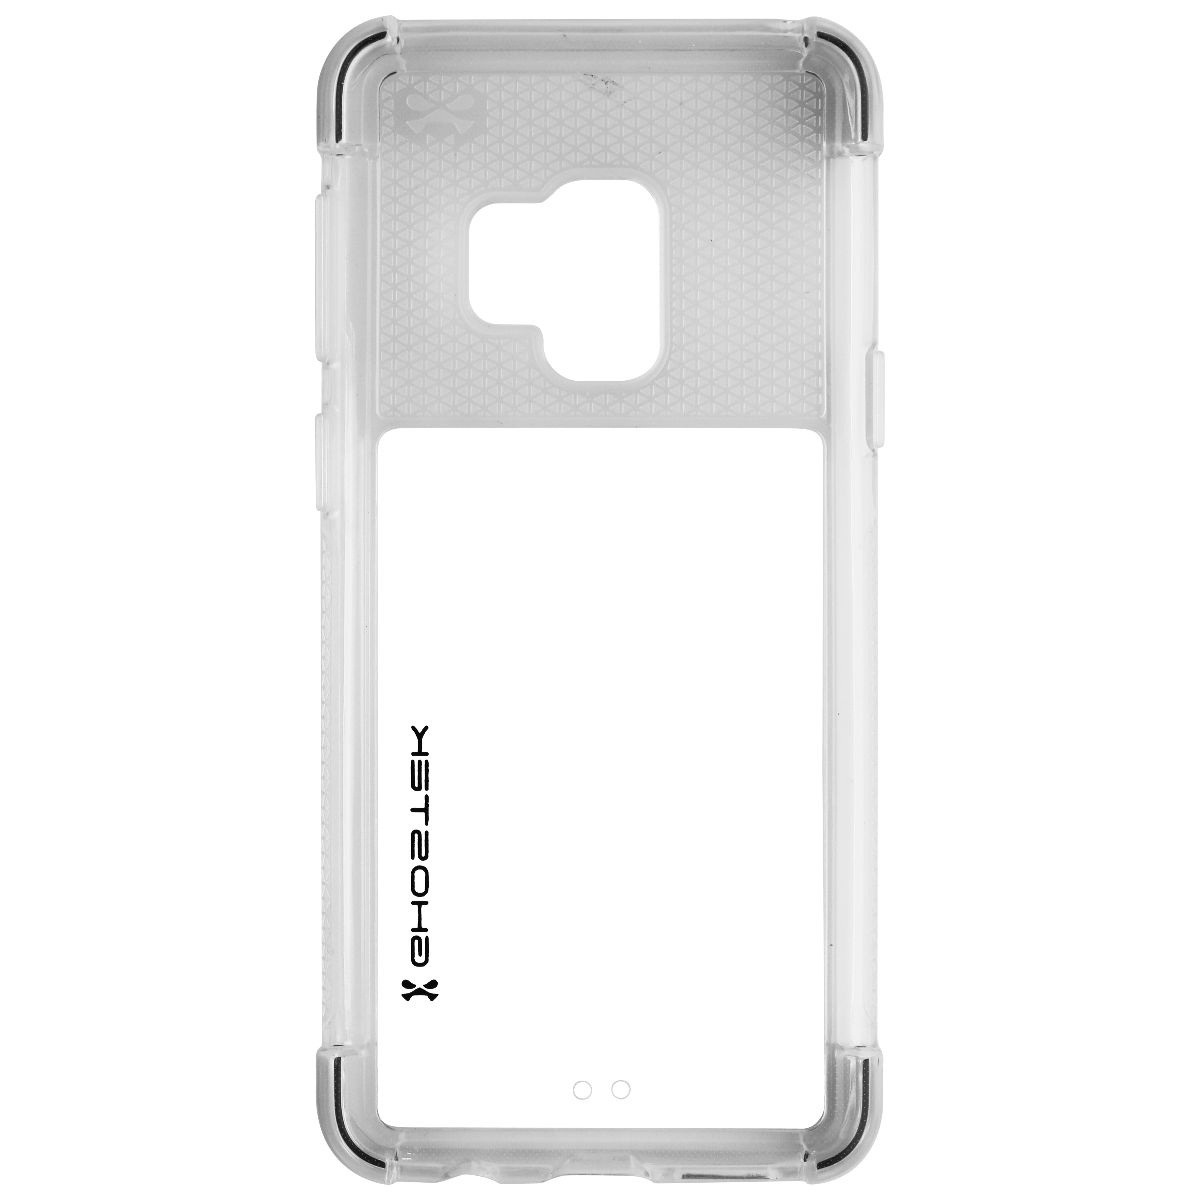 Ghostek Covert2 Series Protective Phone Case For Samsung Galaxy S9 - Clear (Refurbished)